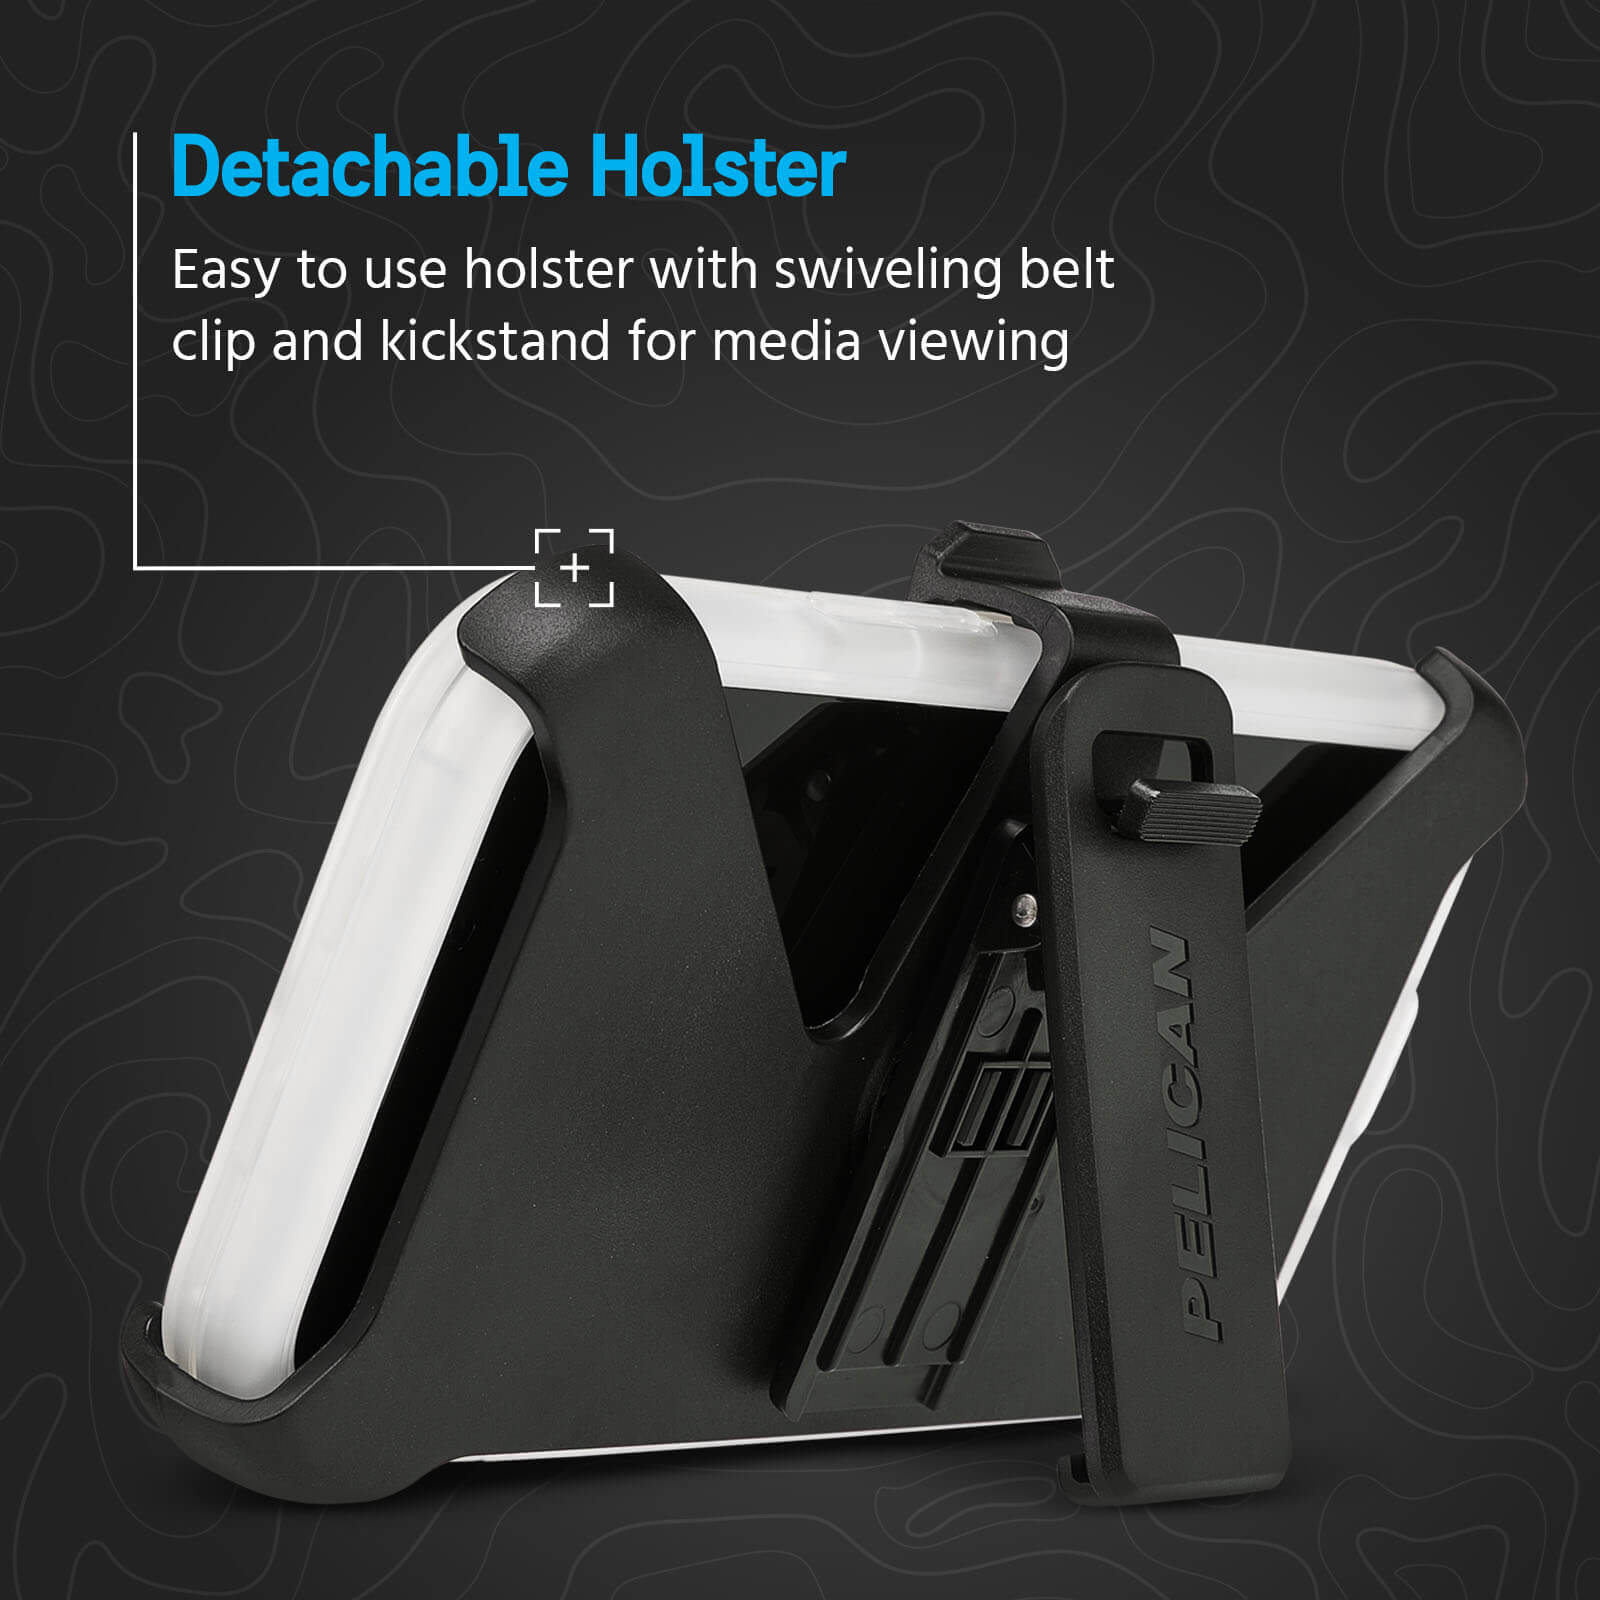 Detachable holster. Easy to use holster with swiveling belt clip and kickstand for media viewing. color::Clear